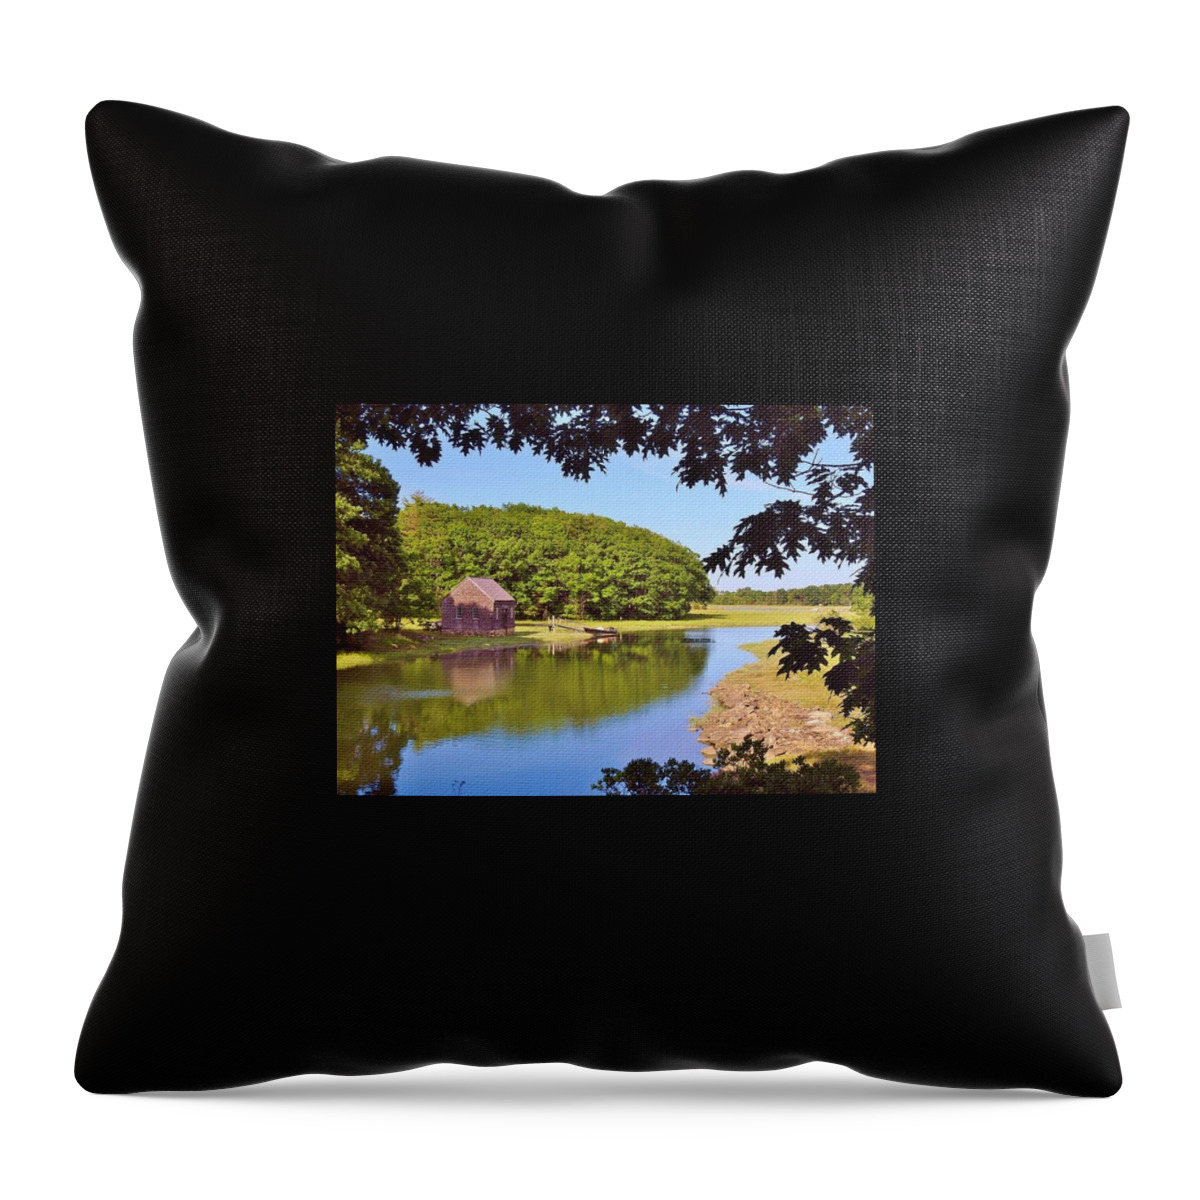 Boathouse Throw Pillow featuring the photograph Summer Boathouse by Elaine Franklin